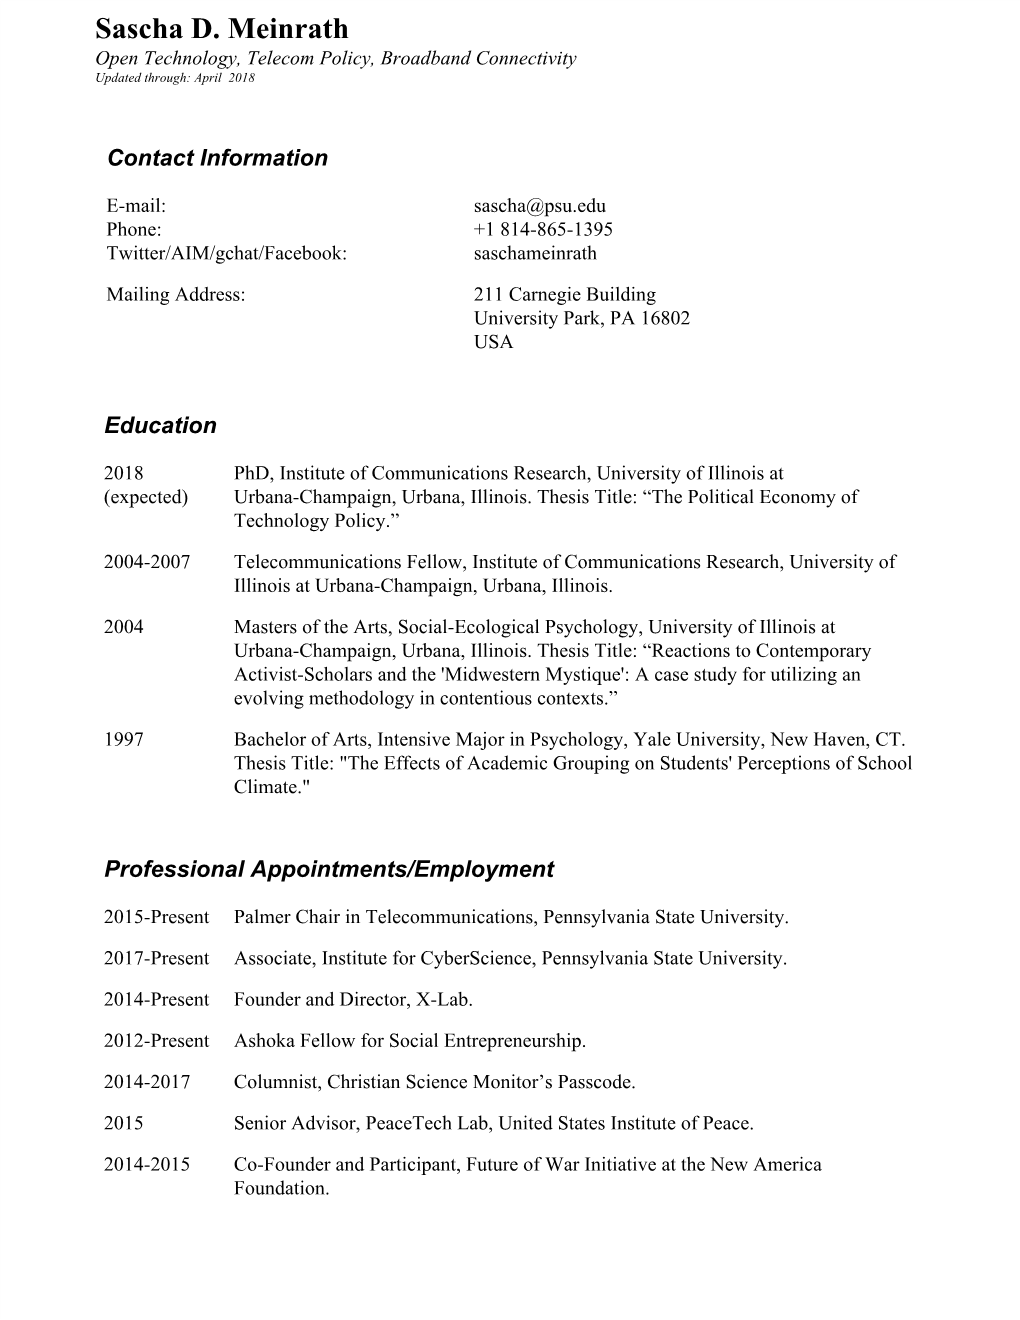 Sascha D. Meinrath Open Technology, Telecom Policy, Broadband Connectivity Updated Through: April 2018